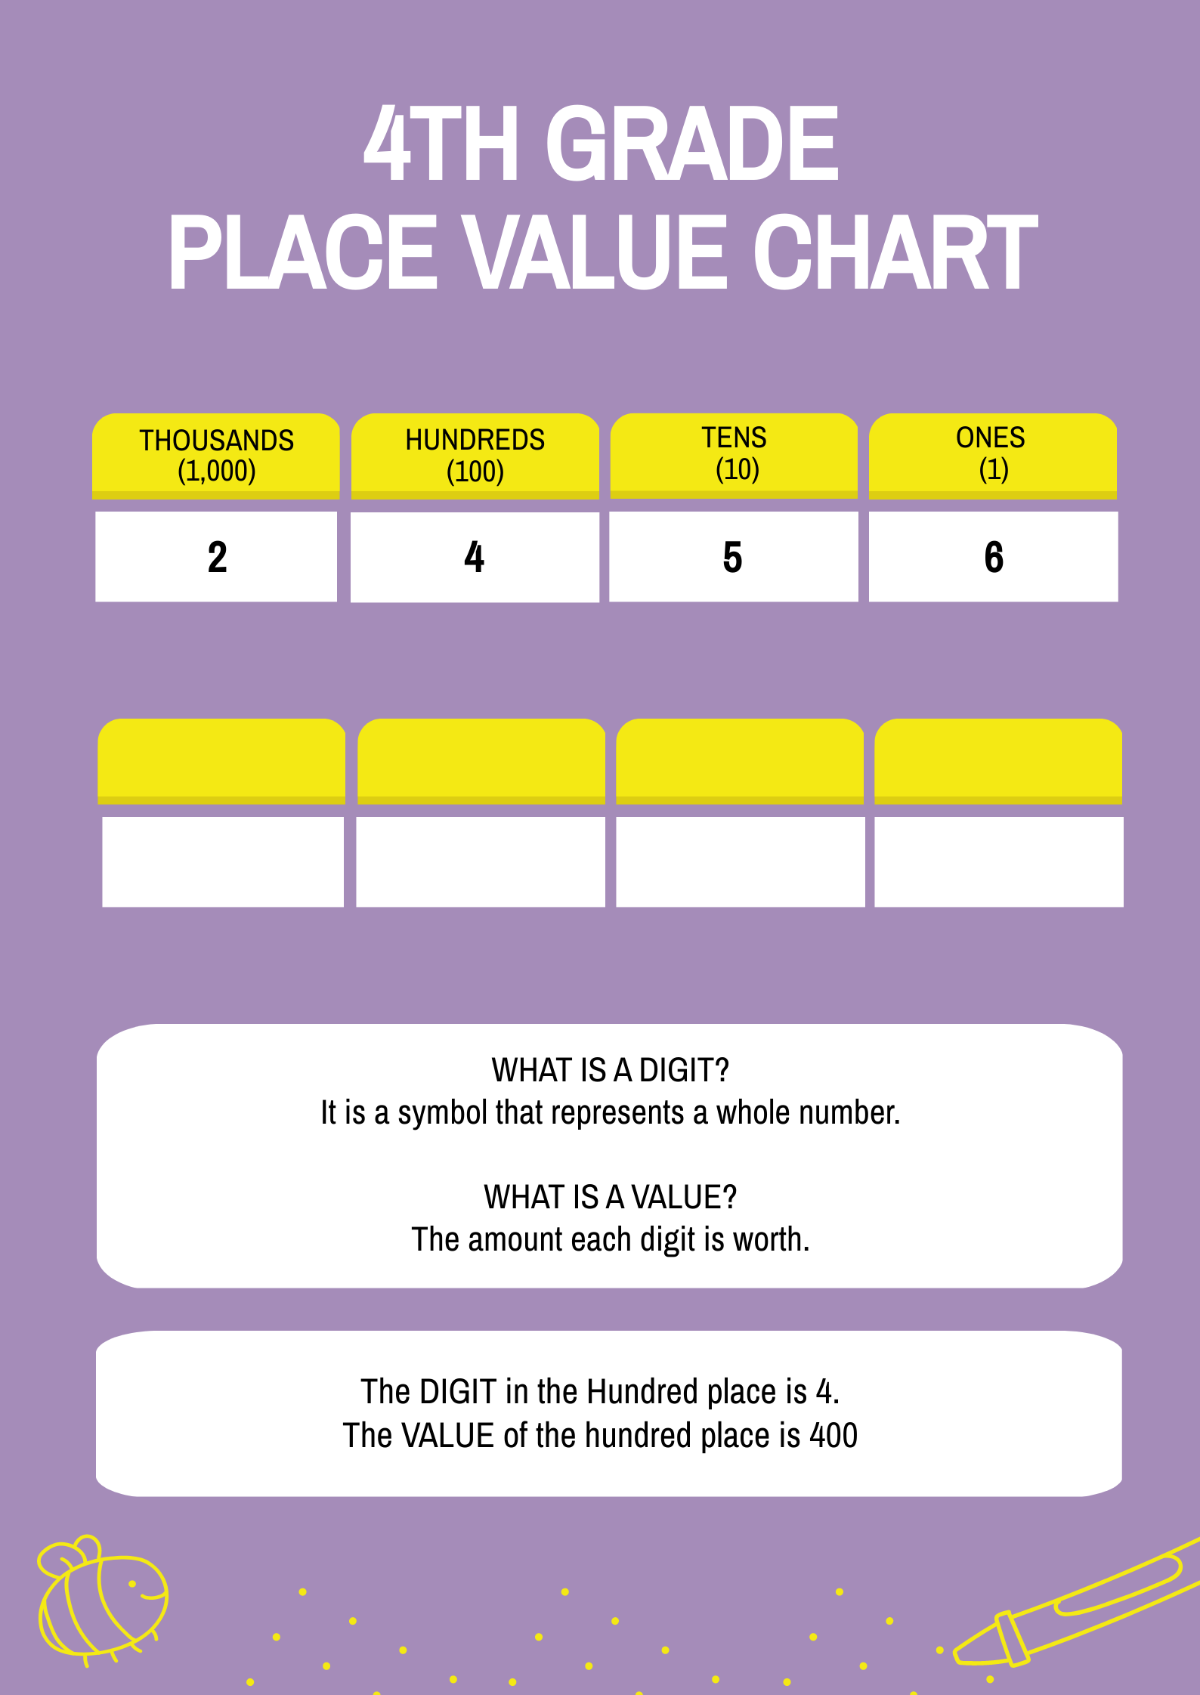 4th Grade Place Value Chart